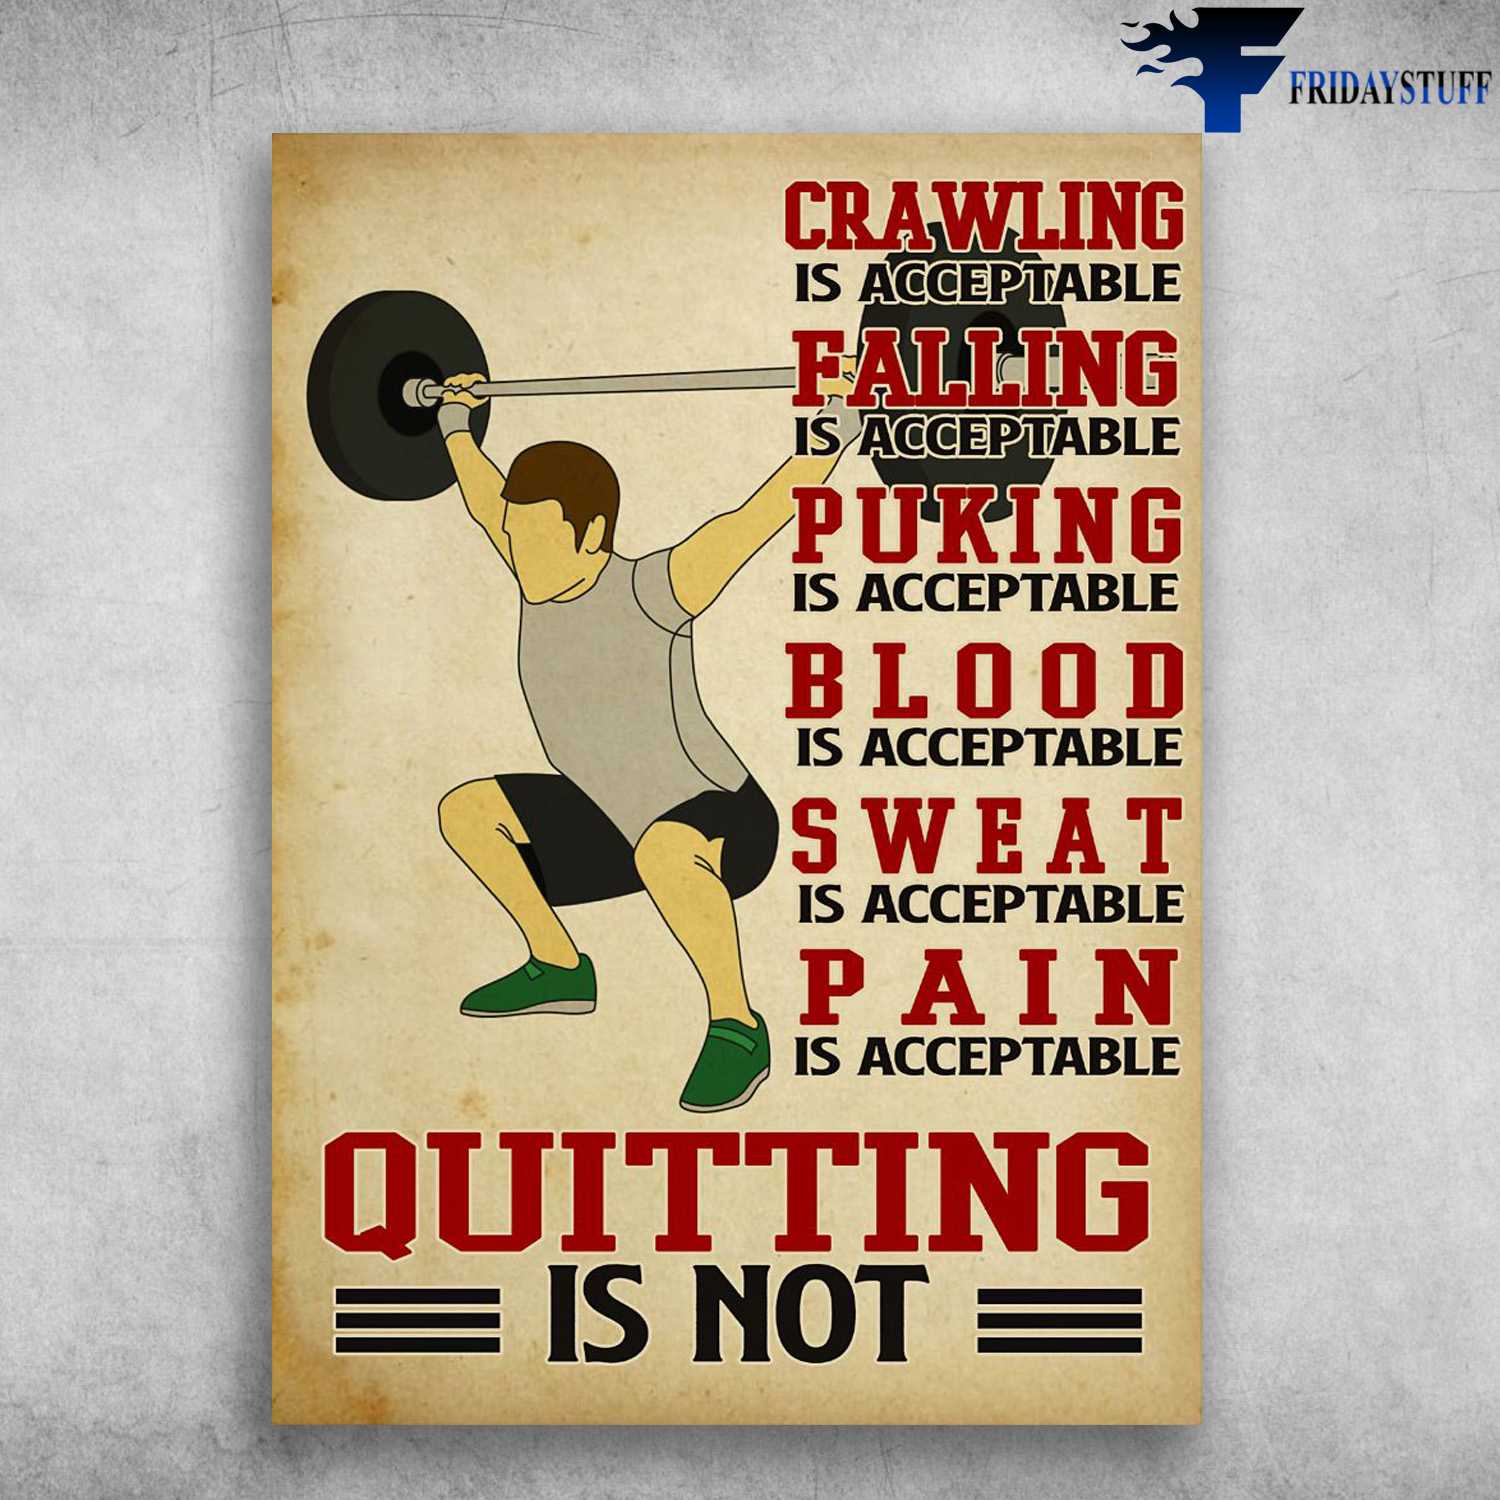 Weightlifting Man - Crawling Is Acceptable, Falling Is Acceptable, Puking Is Acceptable, Blood Is Acceptable, Sweat Is Acceptable, Pain Is Acceptable, Quitting Is Not